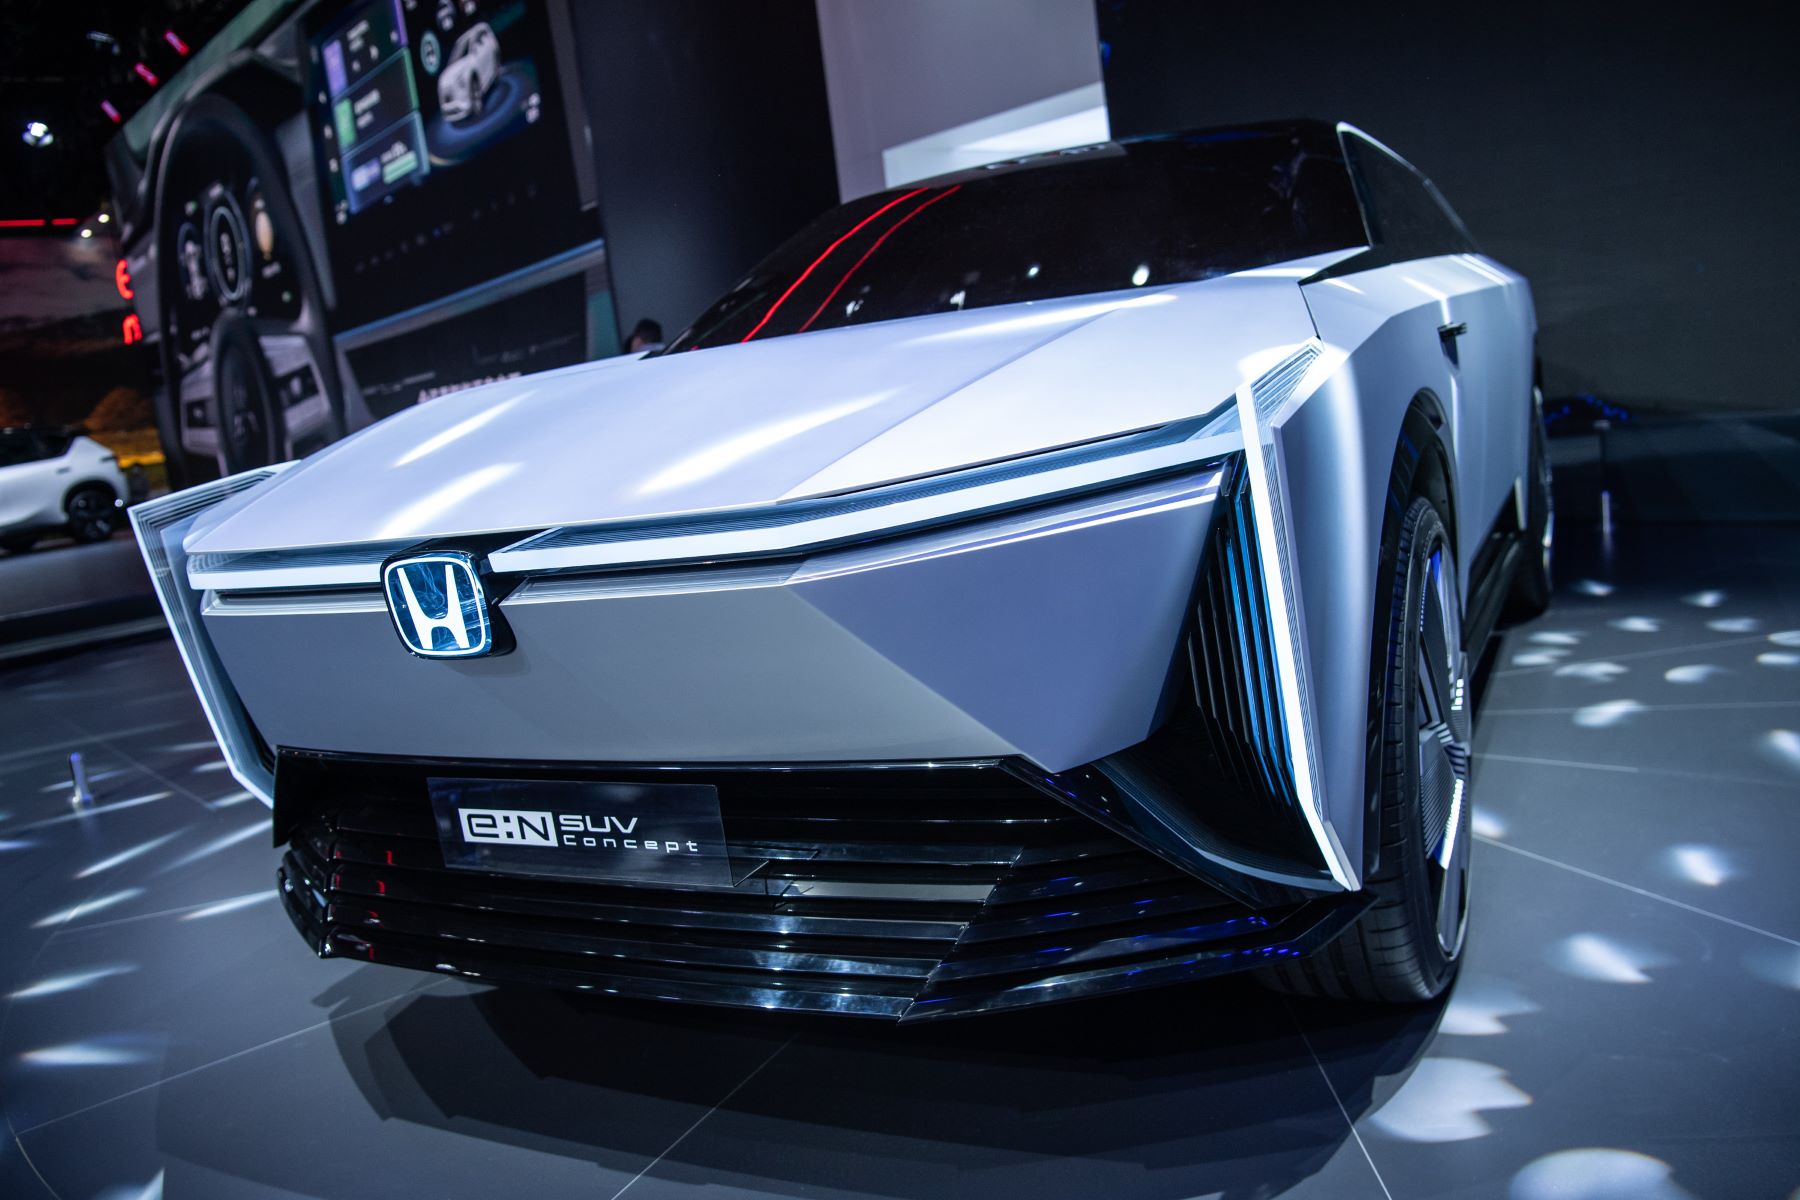 The Honda e:N SUV Concept debuting at the 2021 Guangzhou International Automobile Exhibition at the China Import and Export Fair Complex